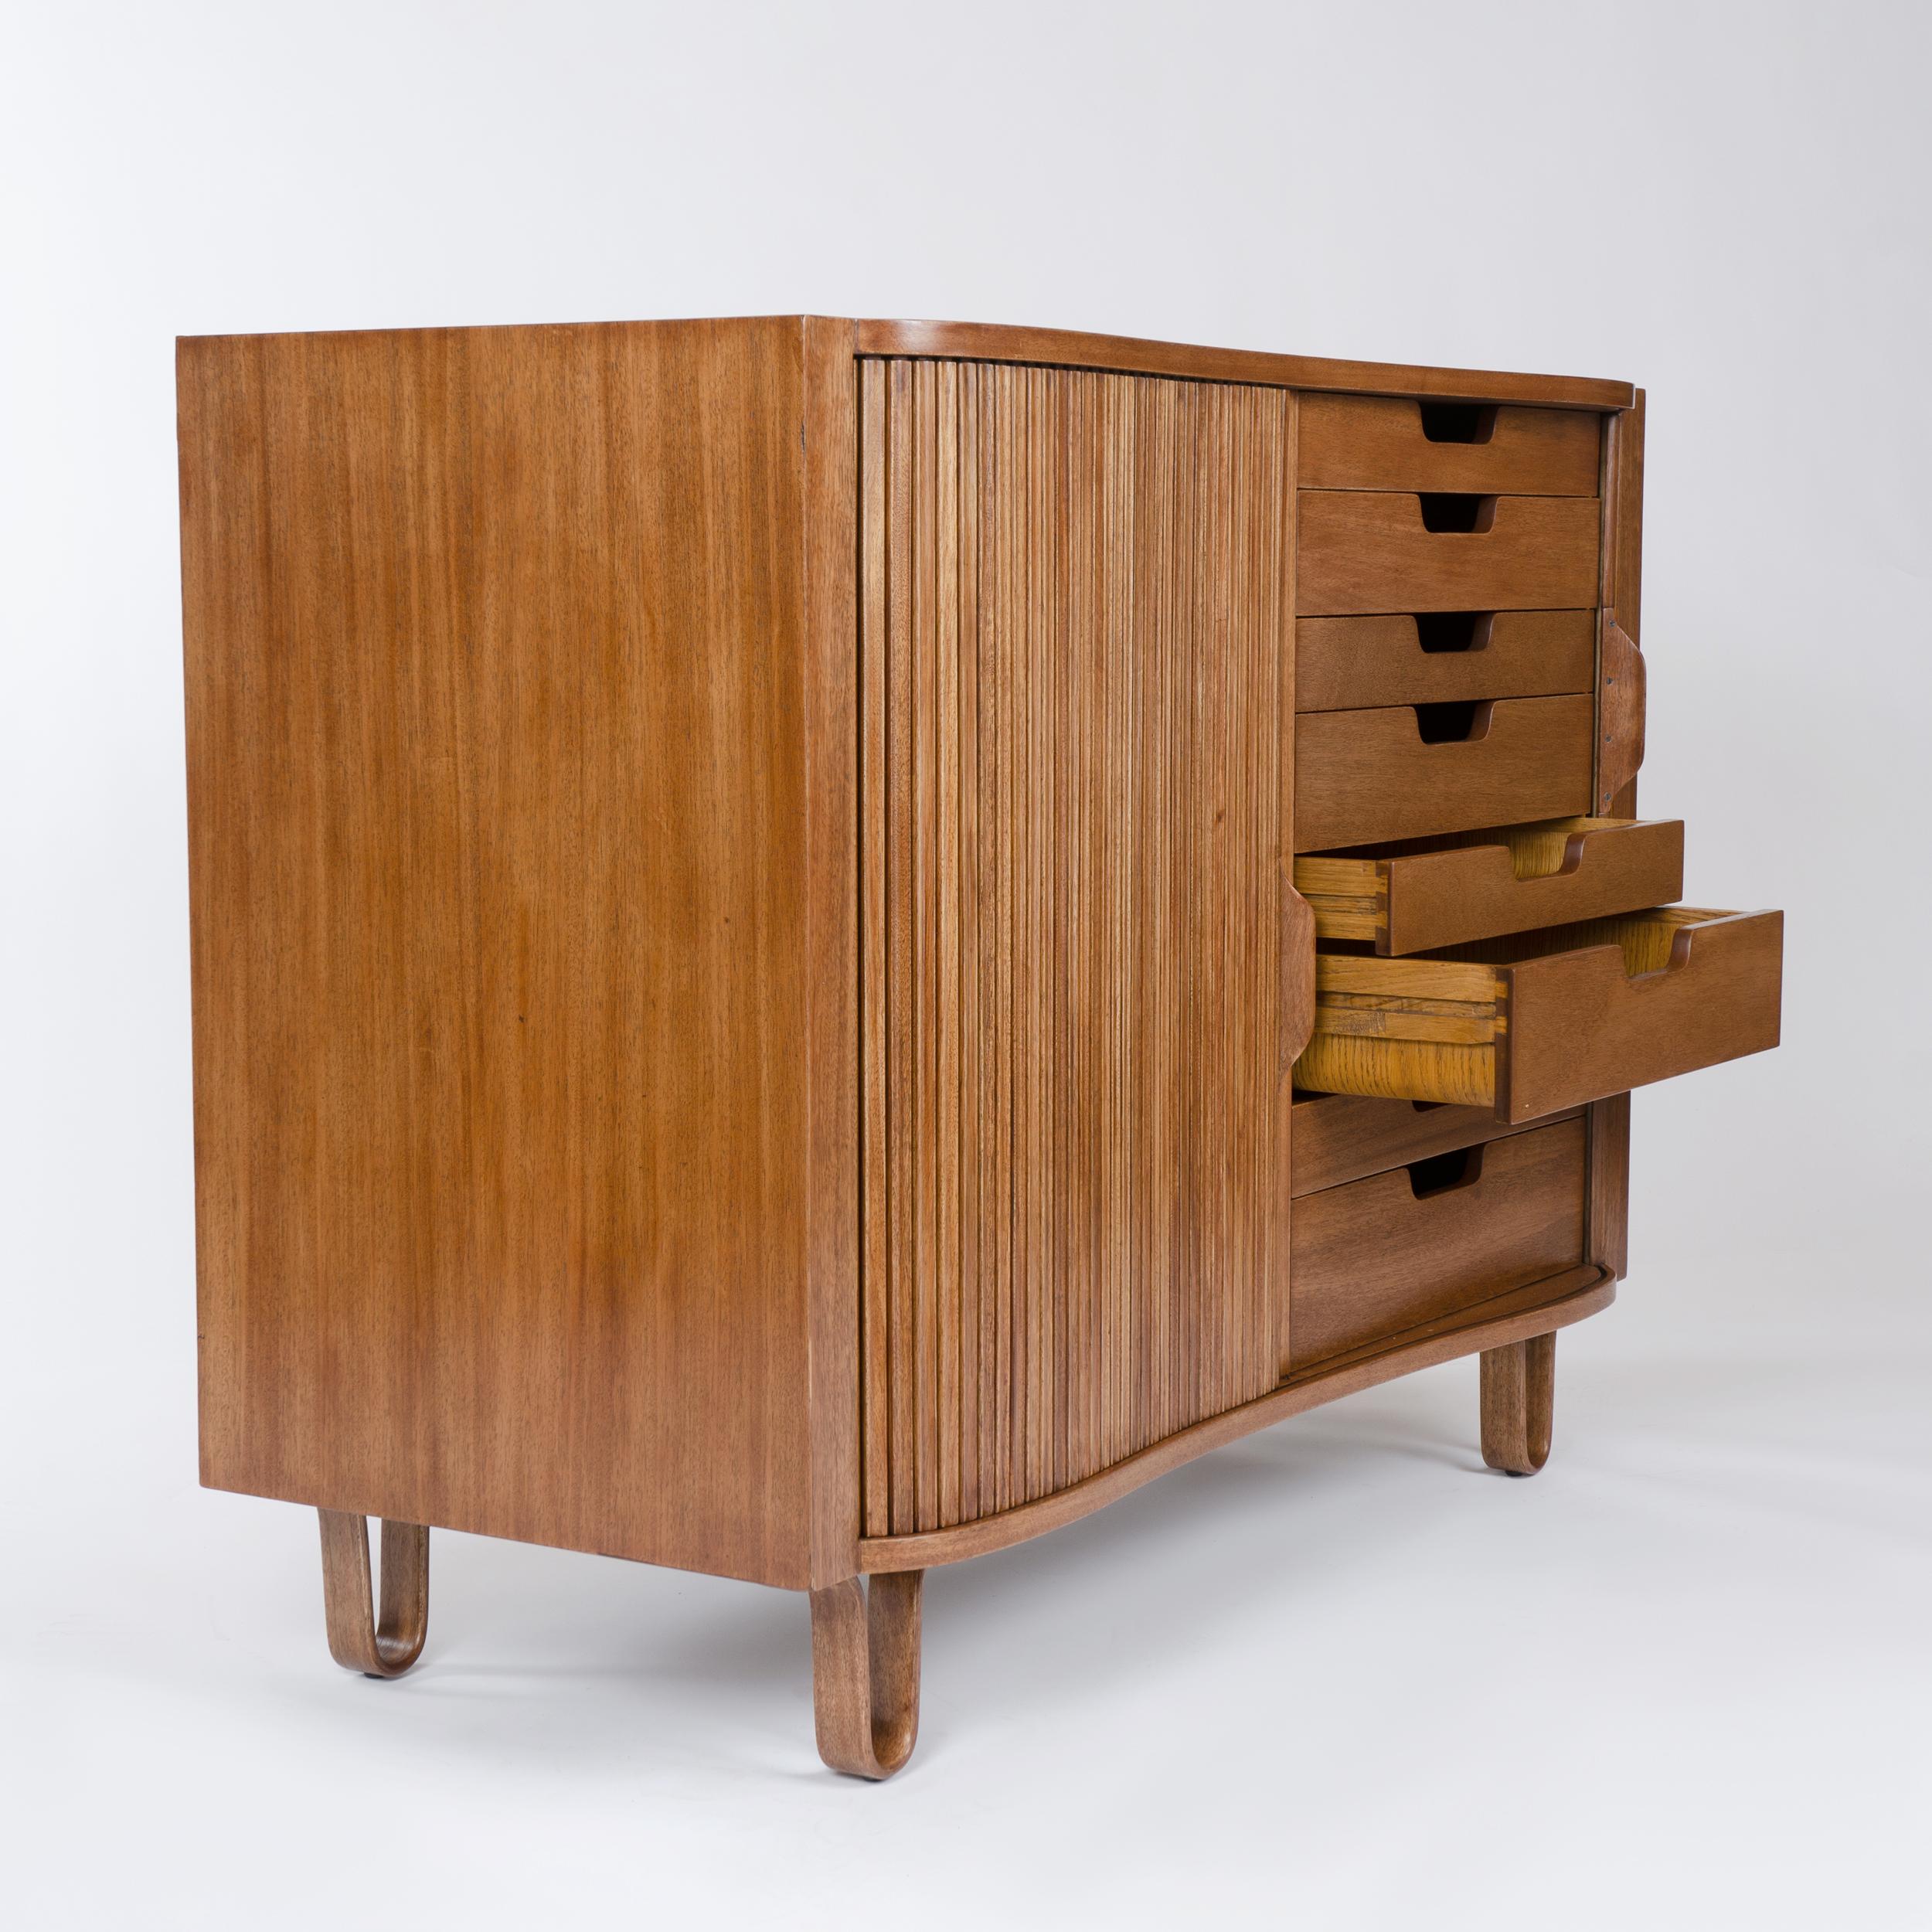 Mid-20th Century 1950s Mister Cabinet in Mahogany by Edward Wormley for Dunbar